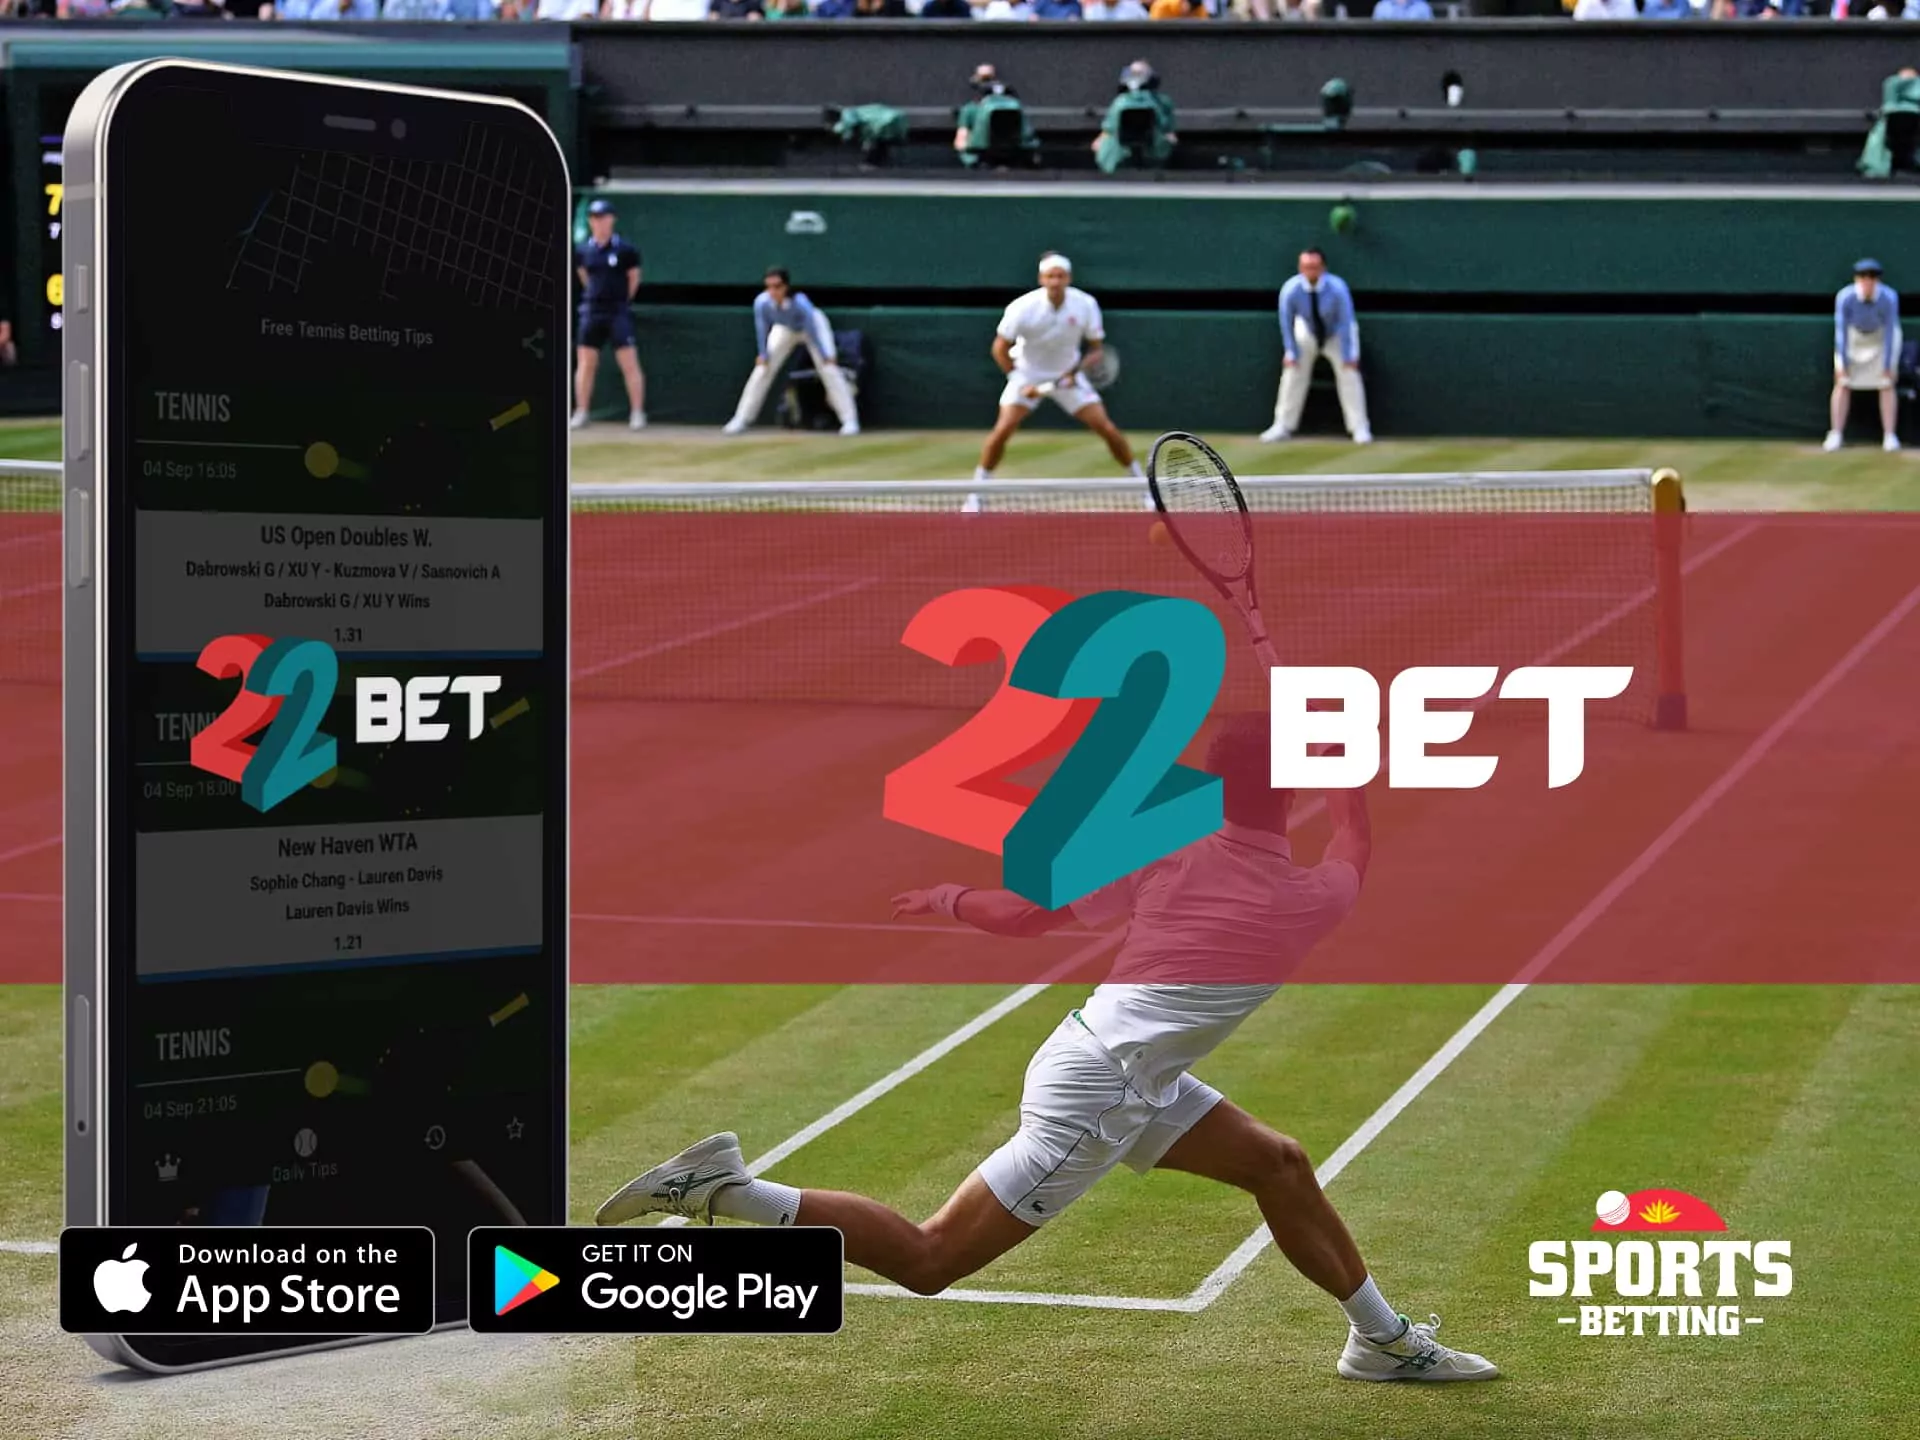 22bet tennis betting site with huge selection of bets on tennis events.